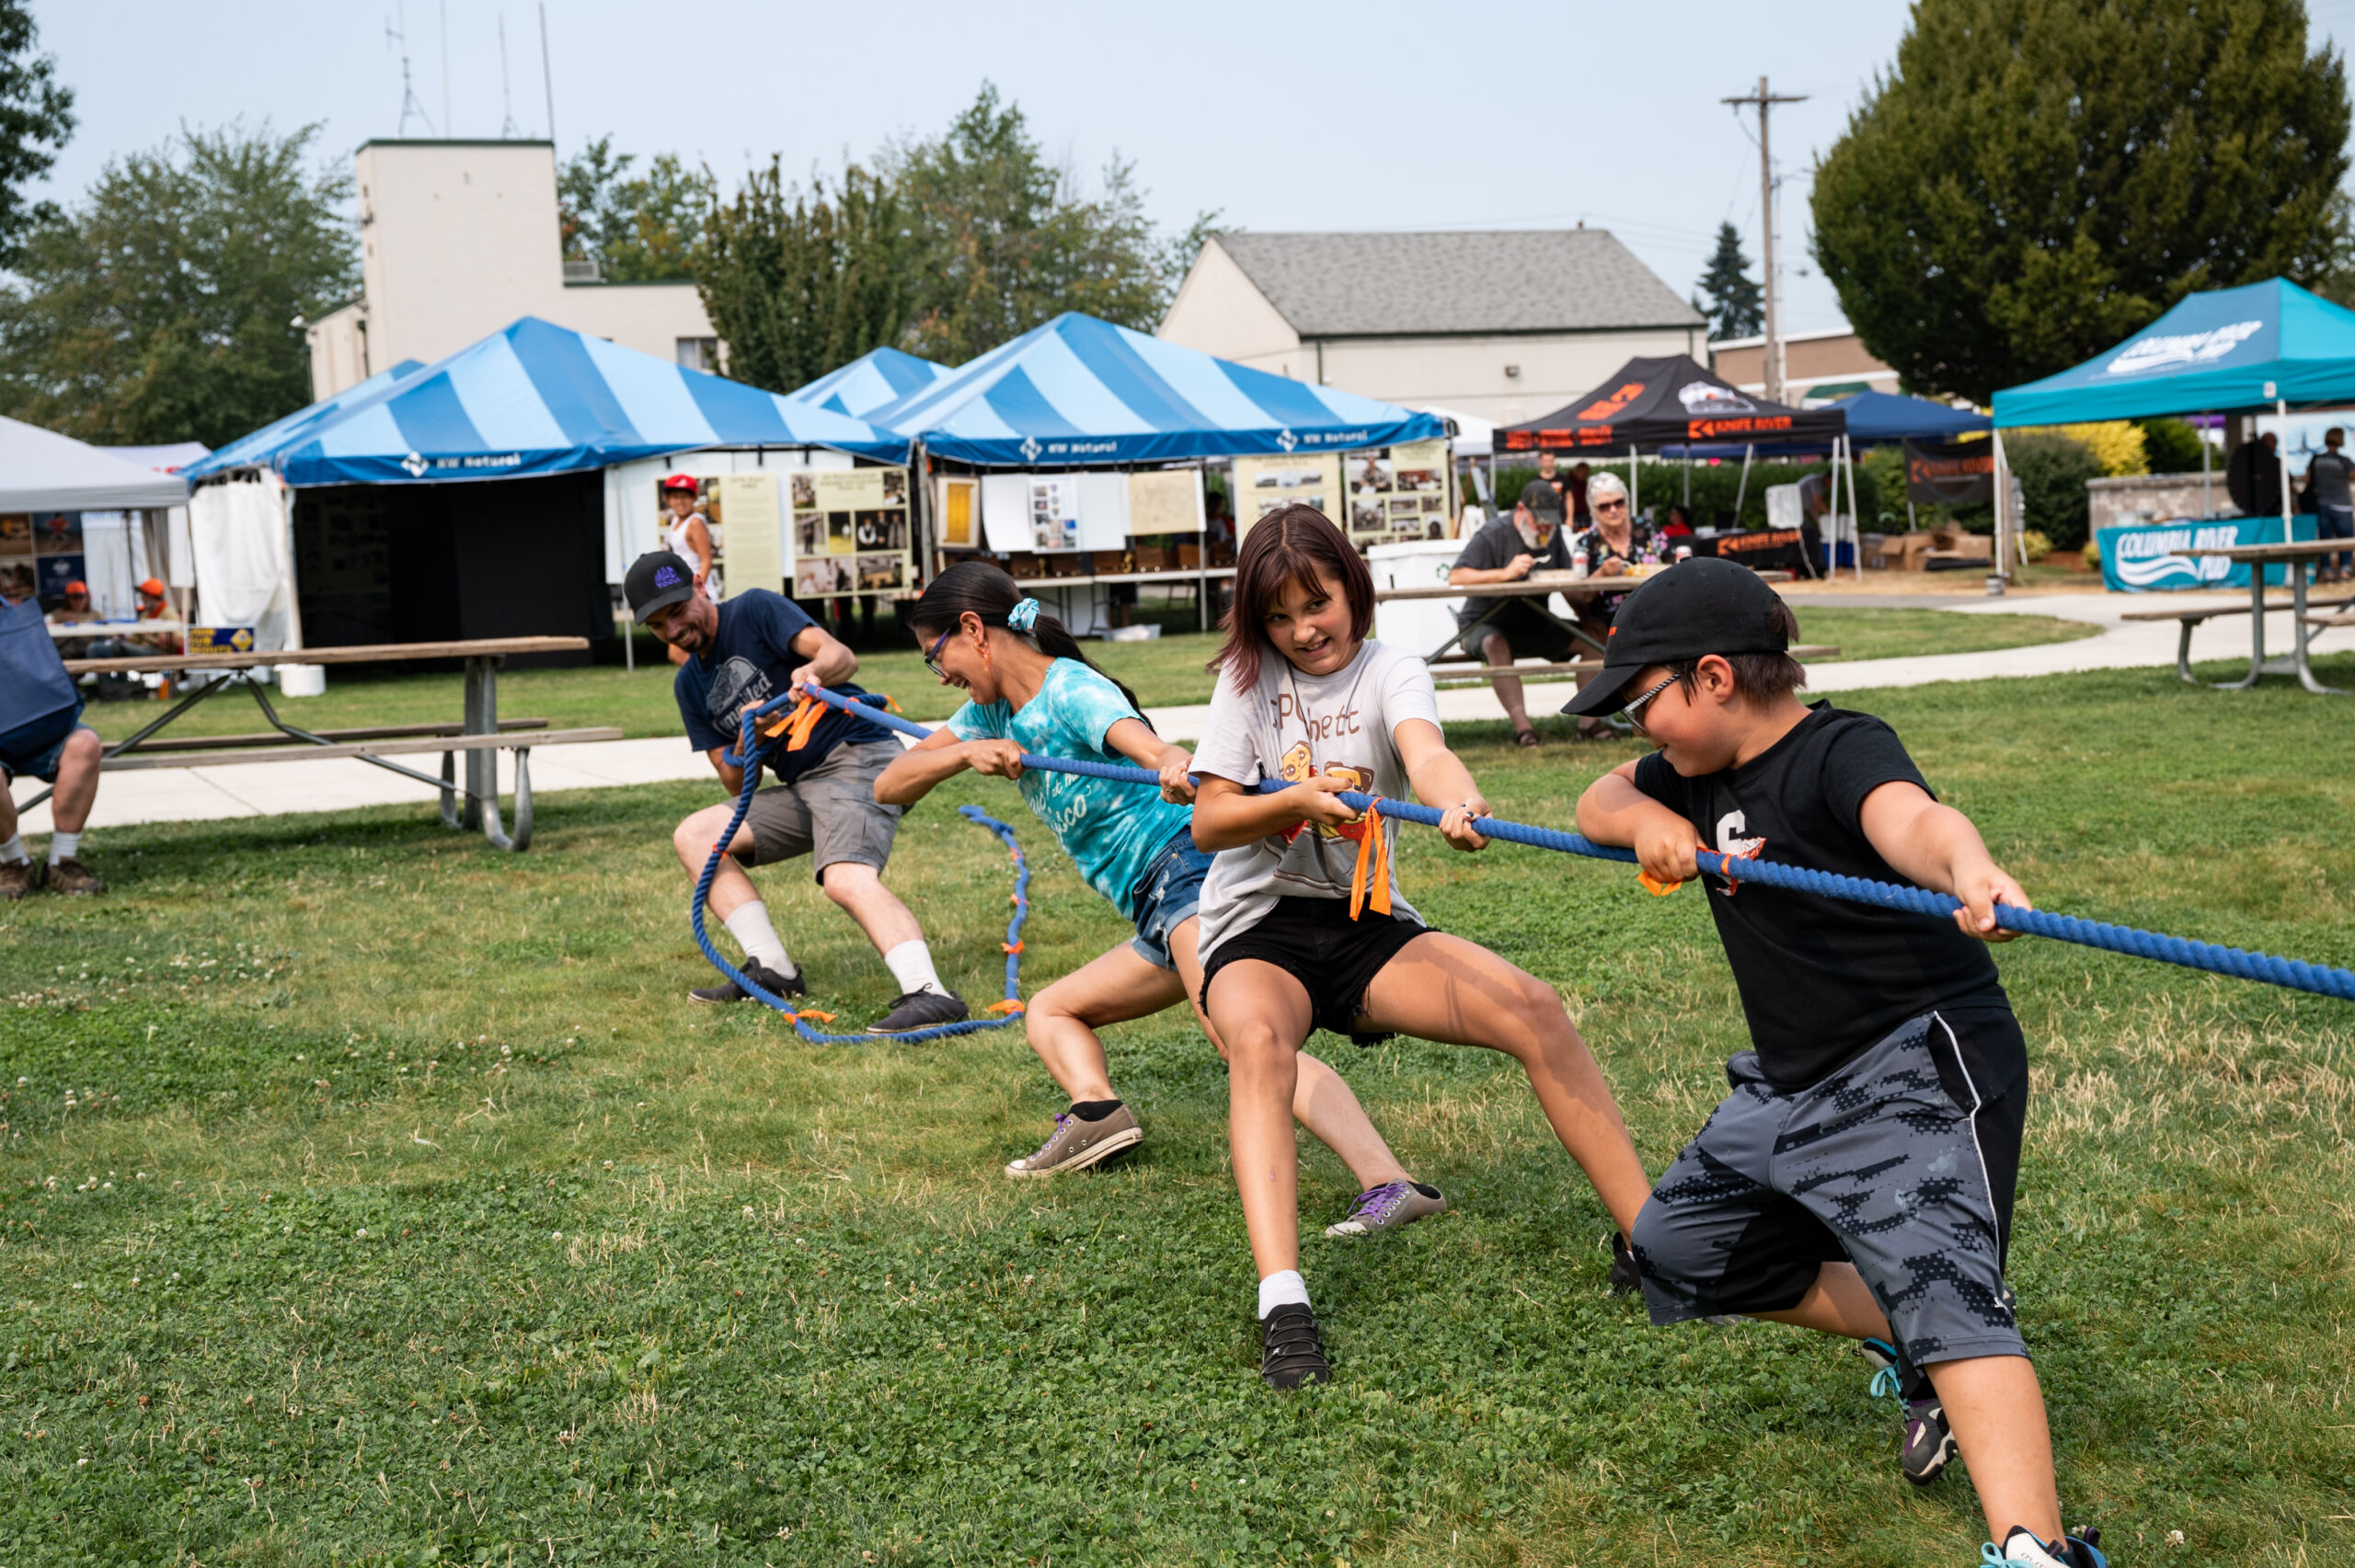 Kids playing tug-of-war at 100-year centennial celebration in Scappoose